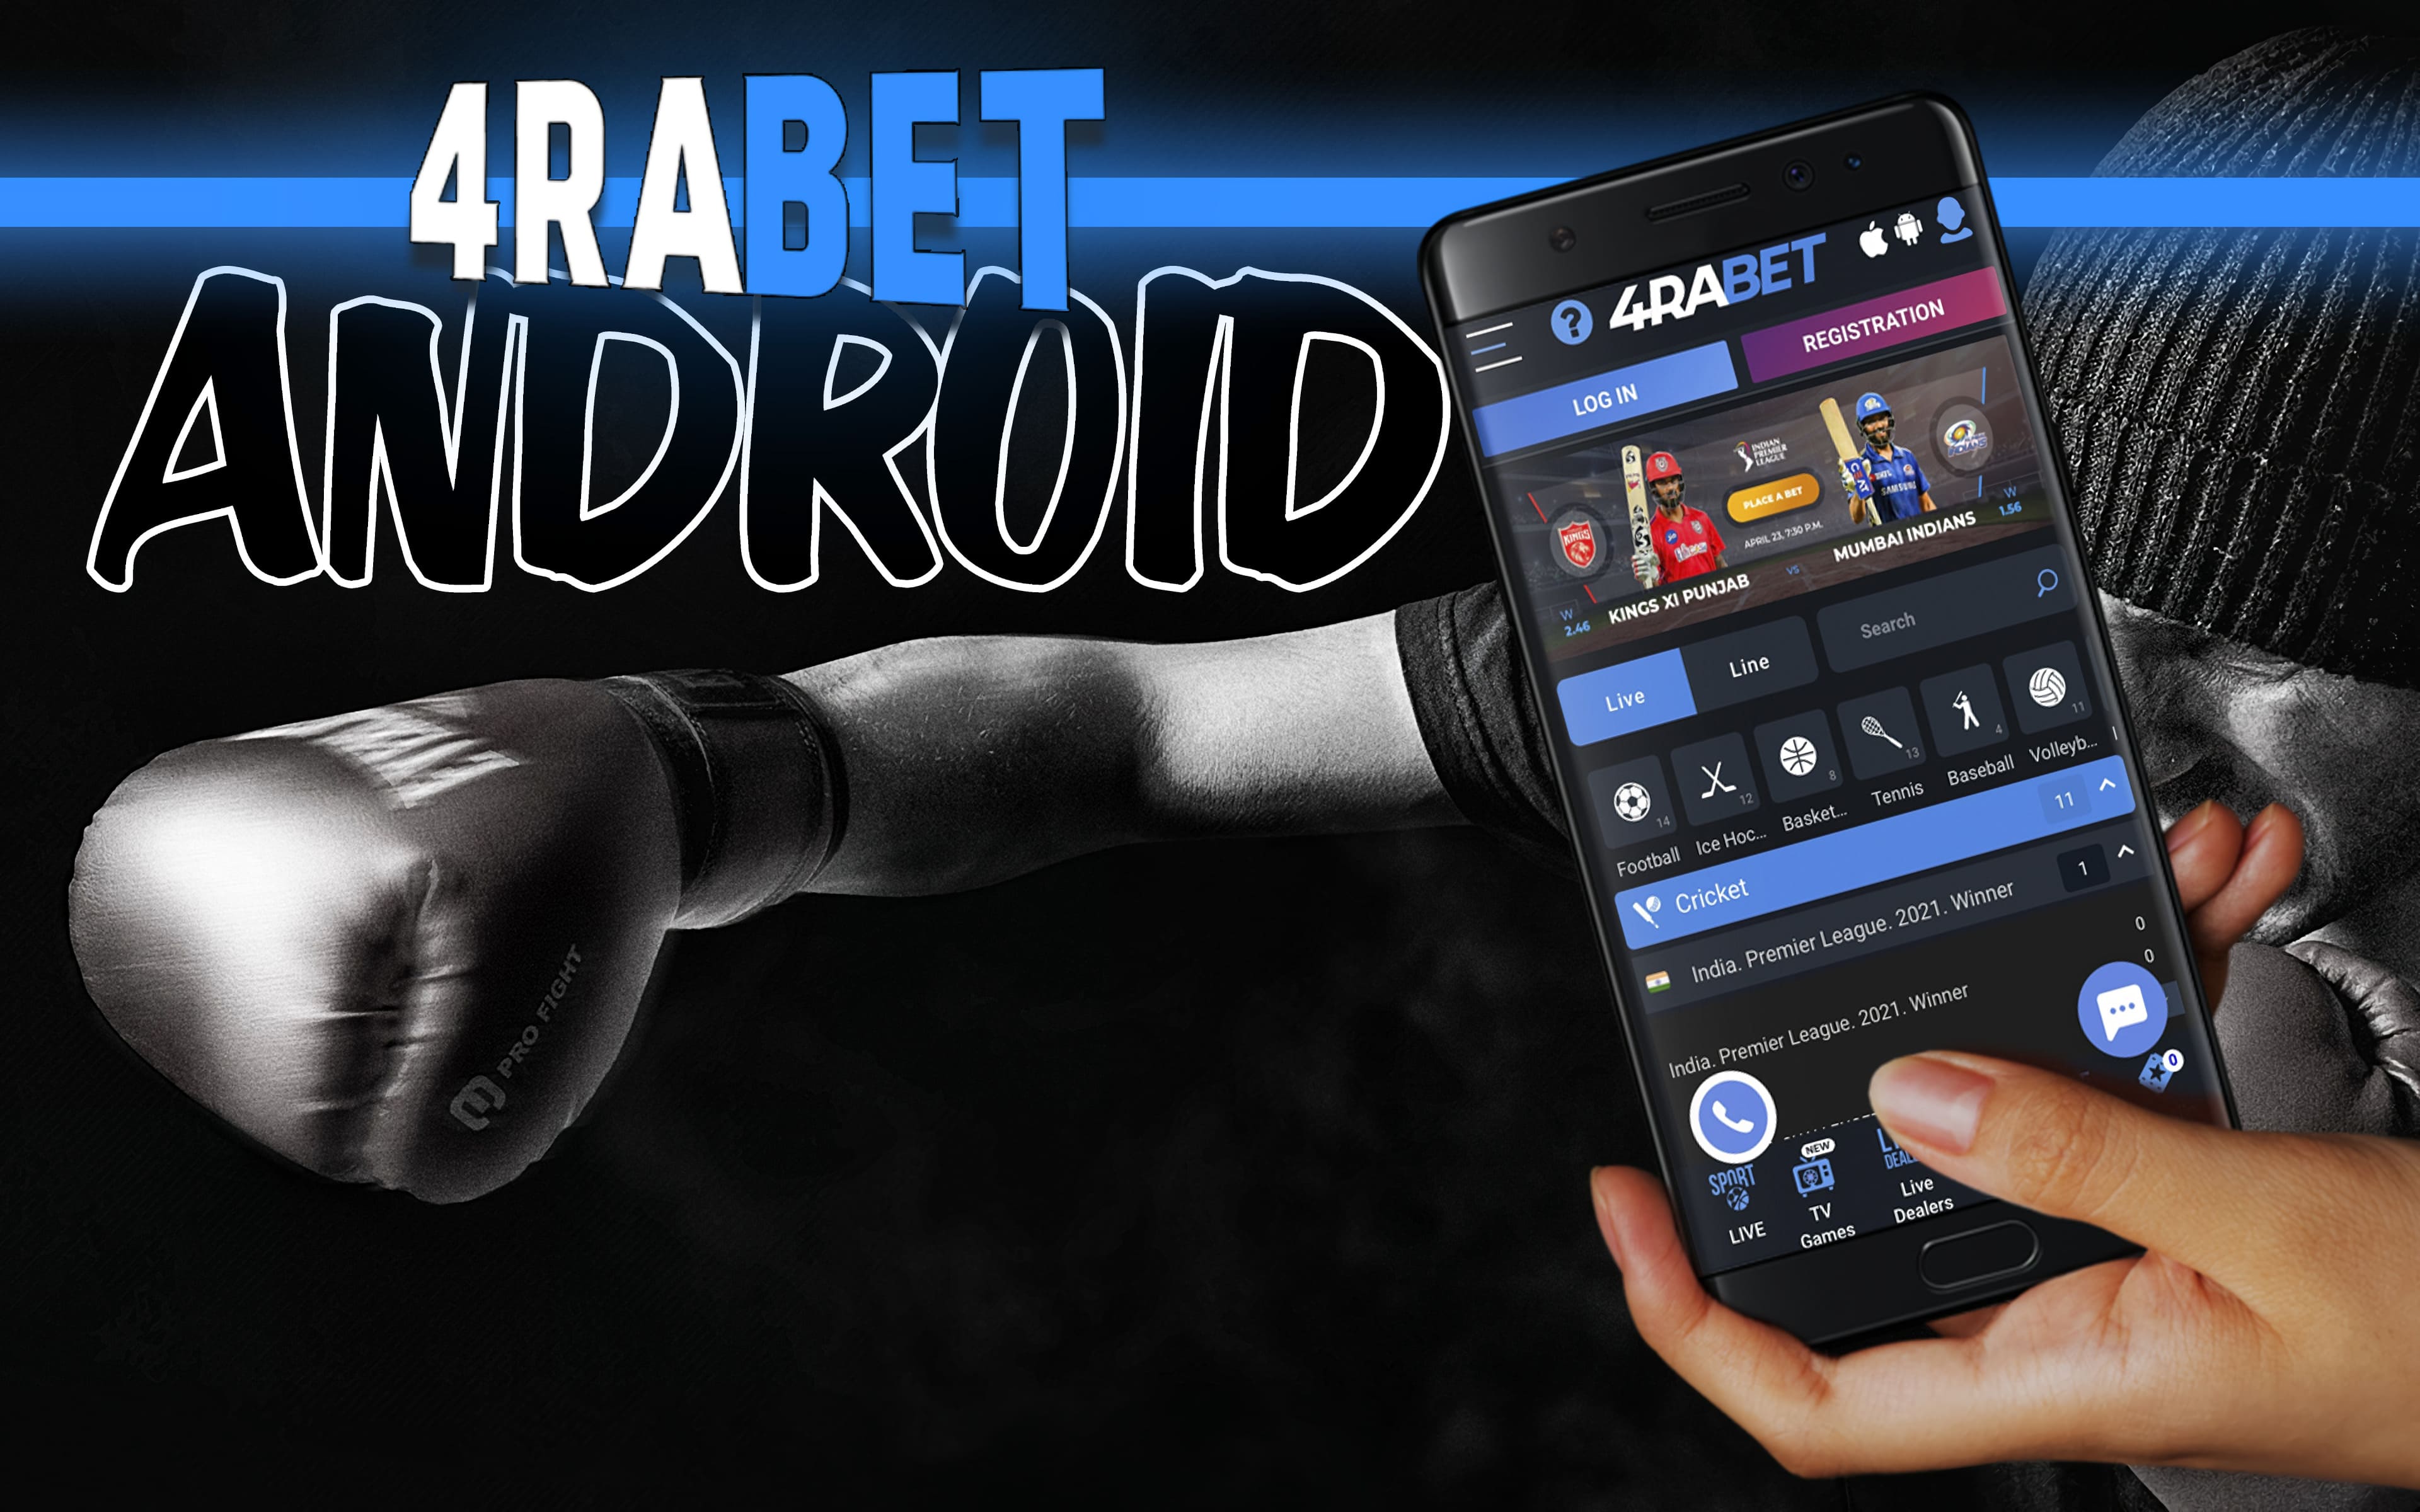 4rabet app android for betting